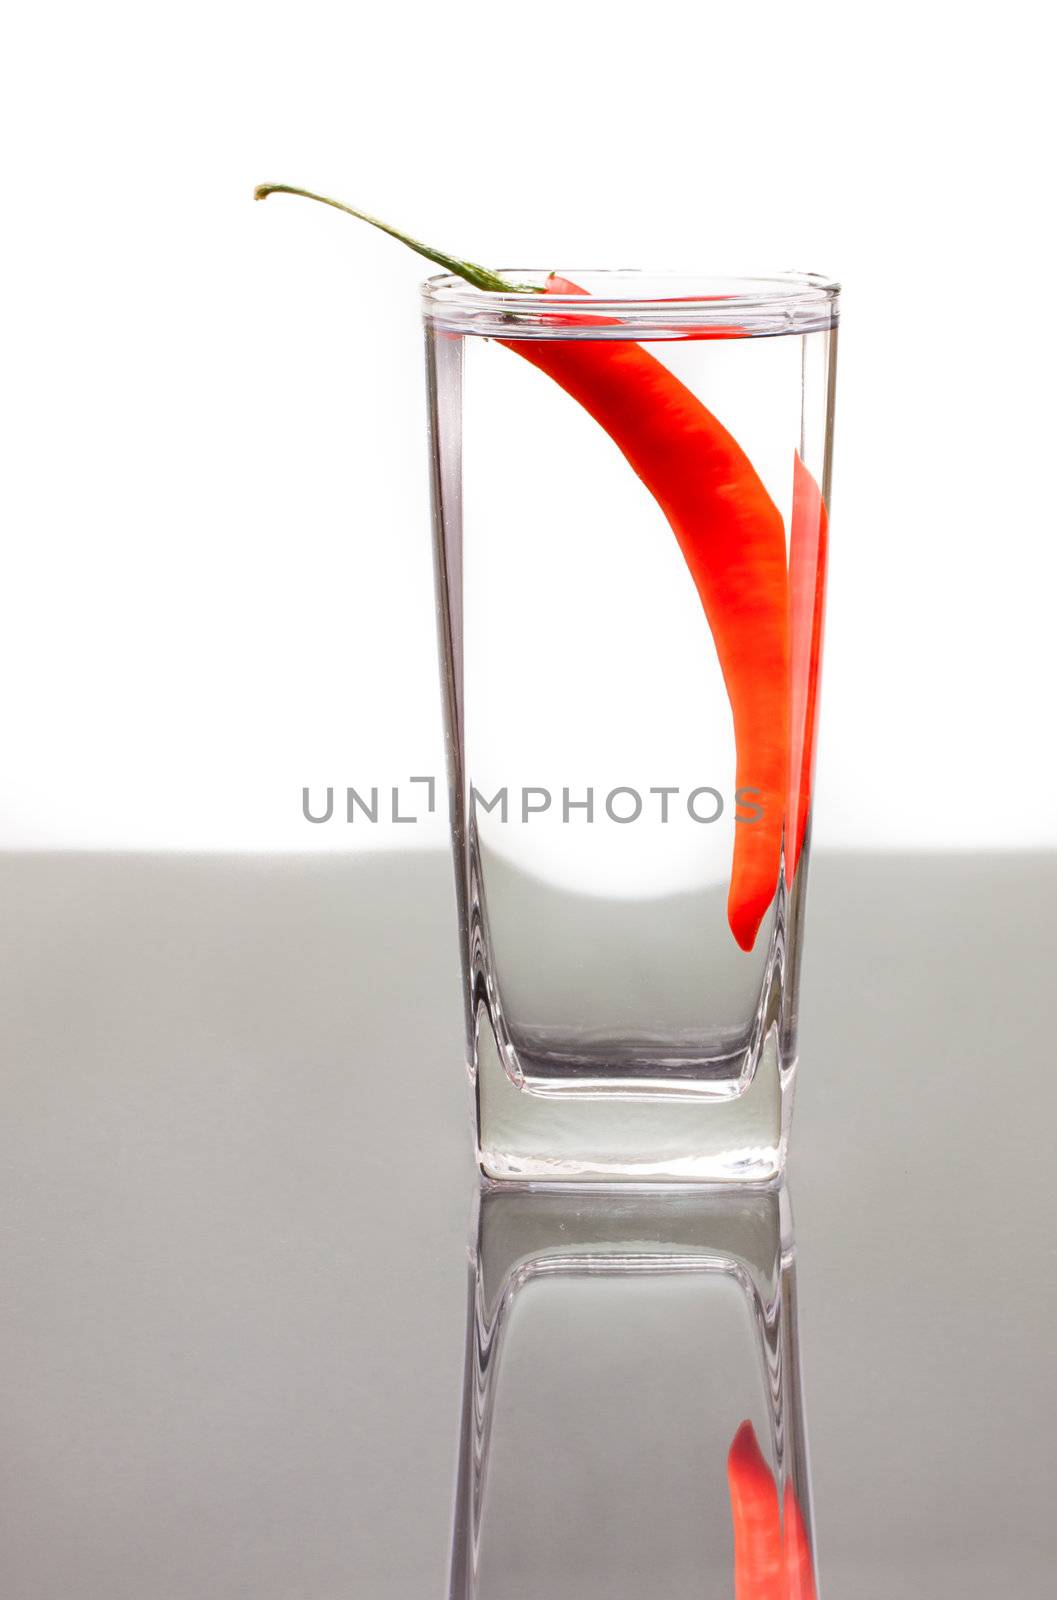 A clear alcoholic drink with a red chilli pepper. On table with reflection and isolated over white